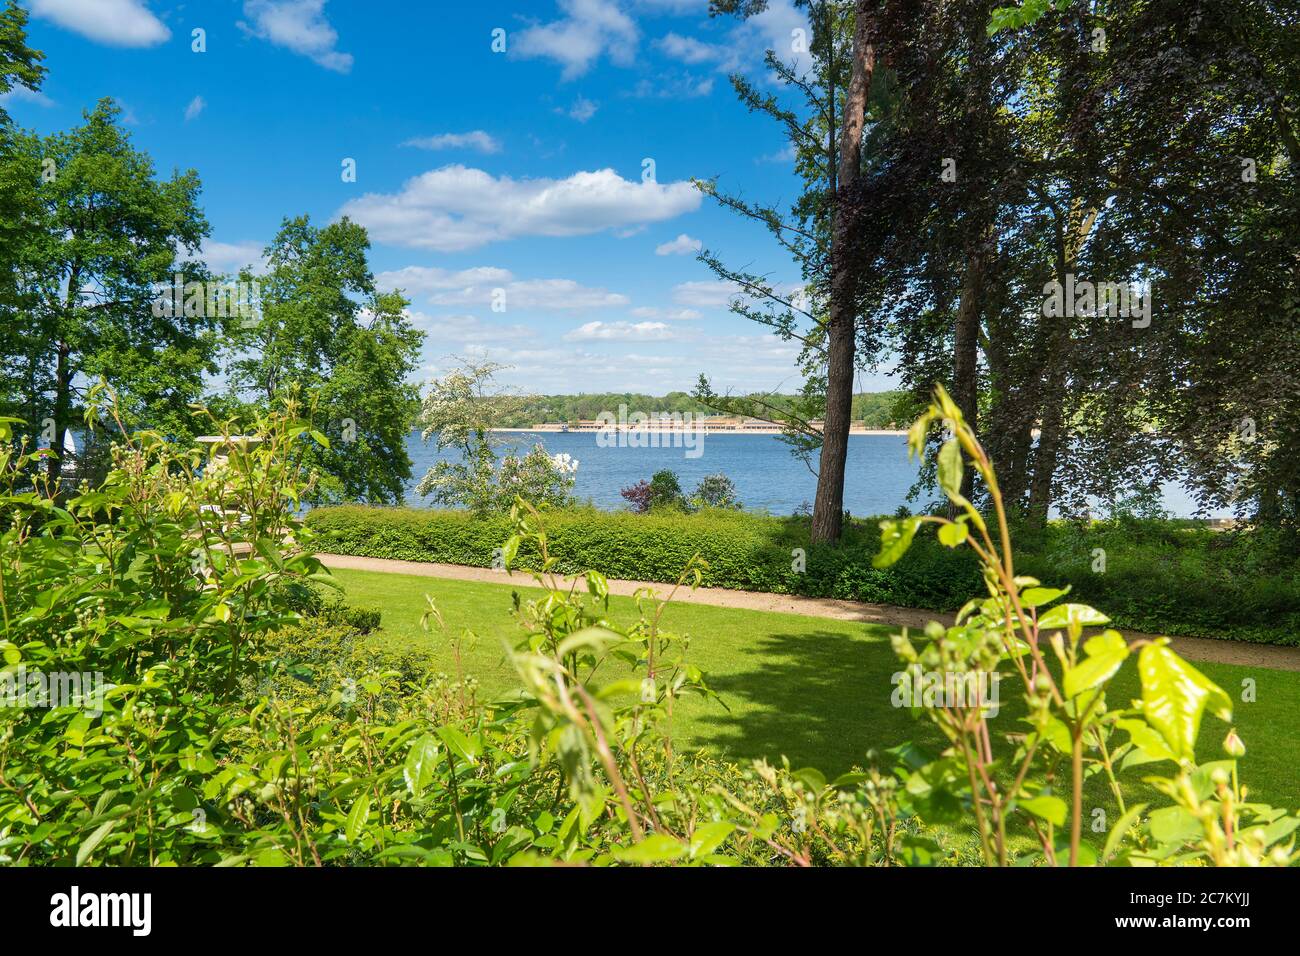 Berlin, Wannsee, House of the Wannsee Conference, garden to the lake side, distant view of the Wannsee lido Stock Photo